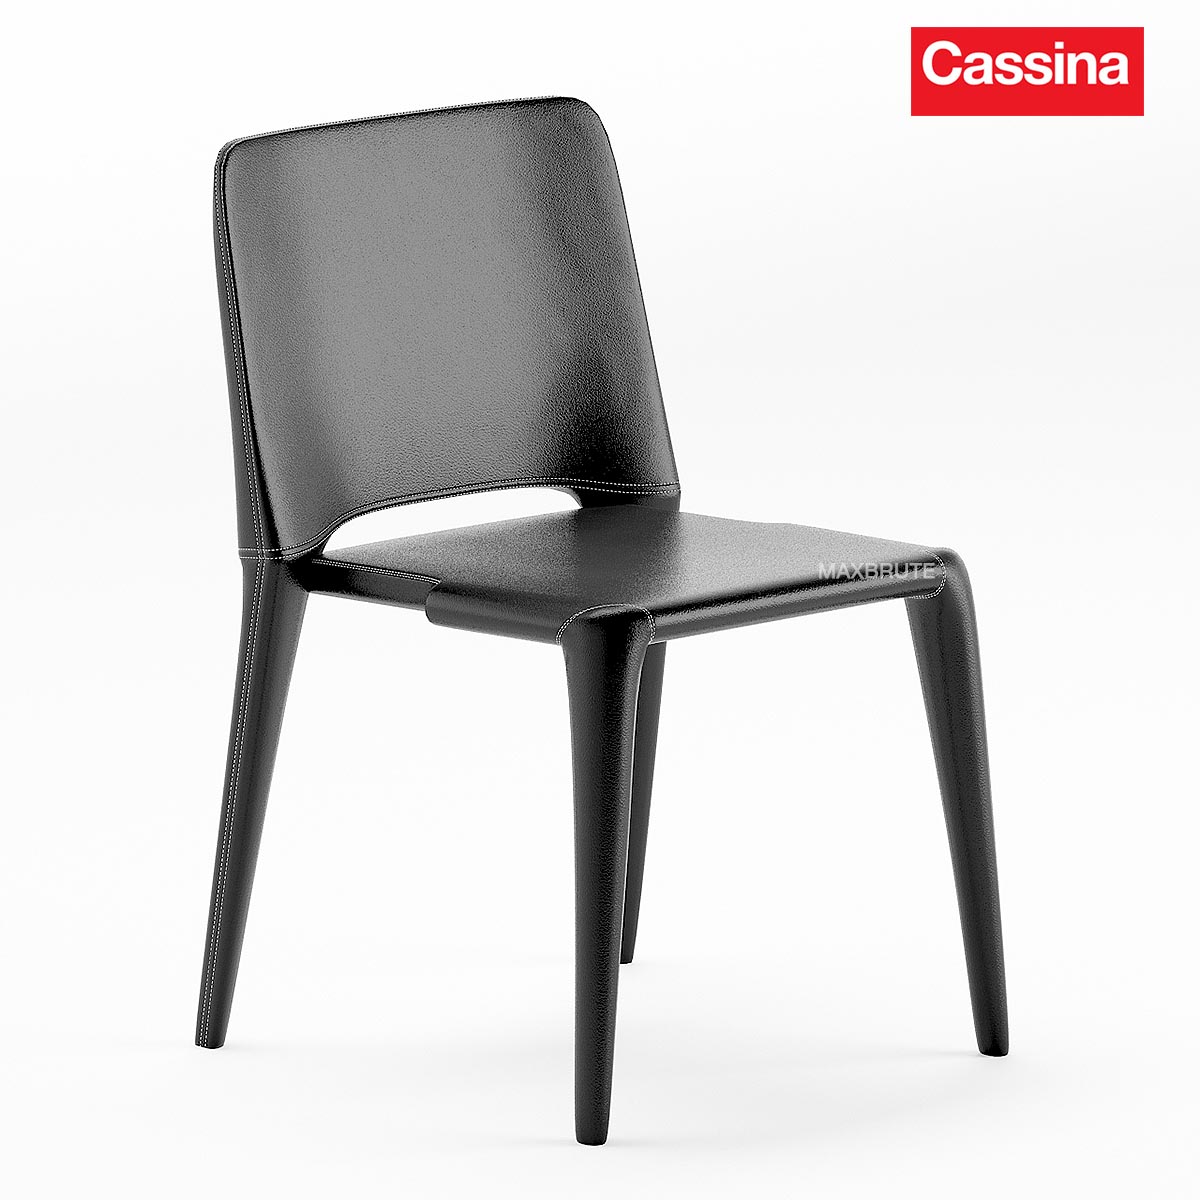 Cassina Bull Chair 3dsmax And Sketchup Maxbrute